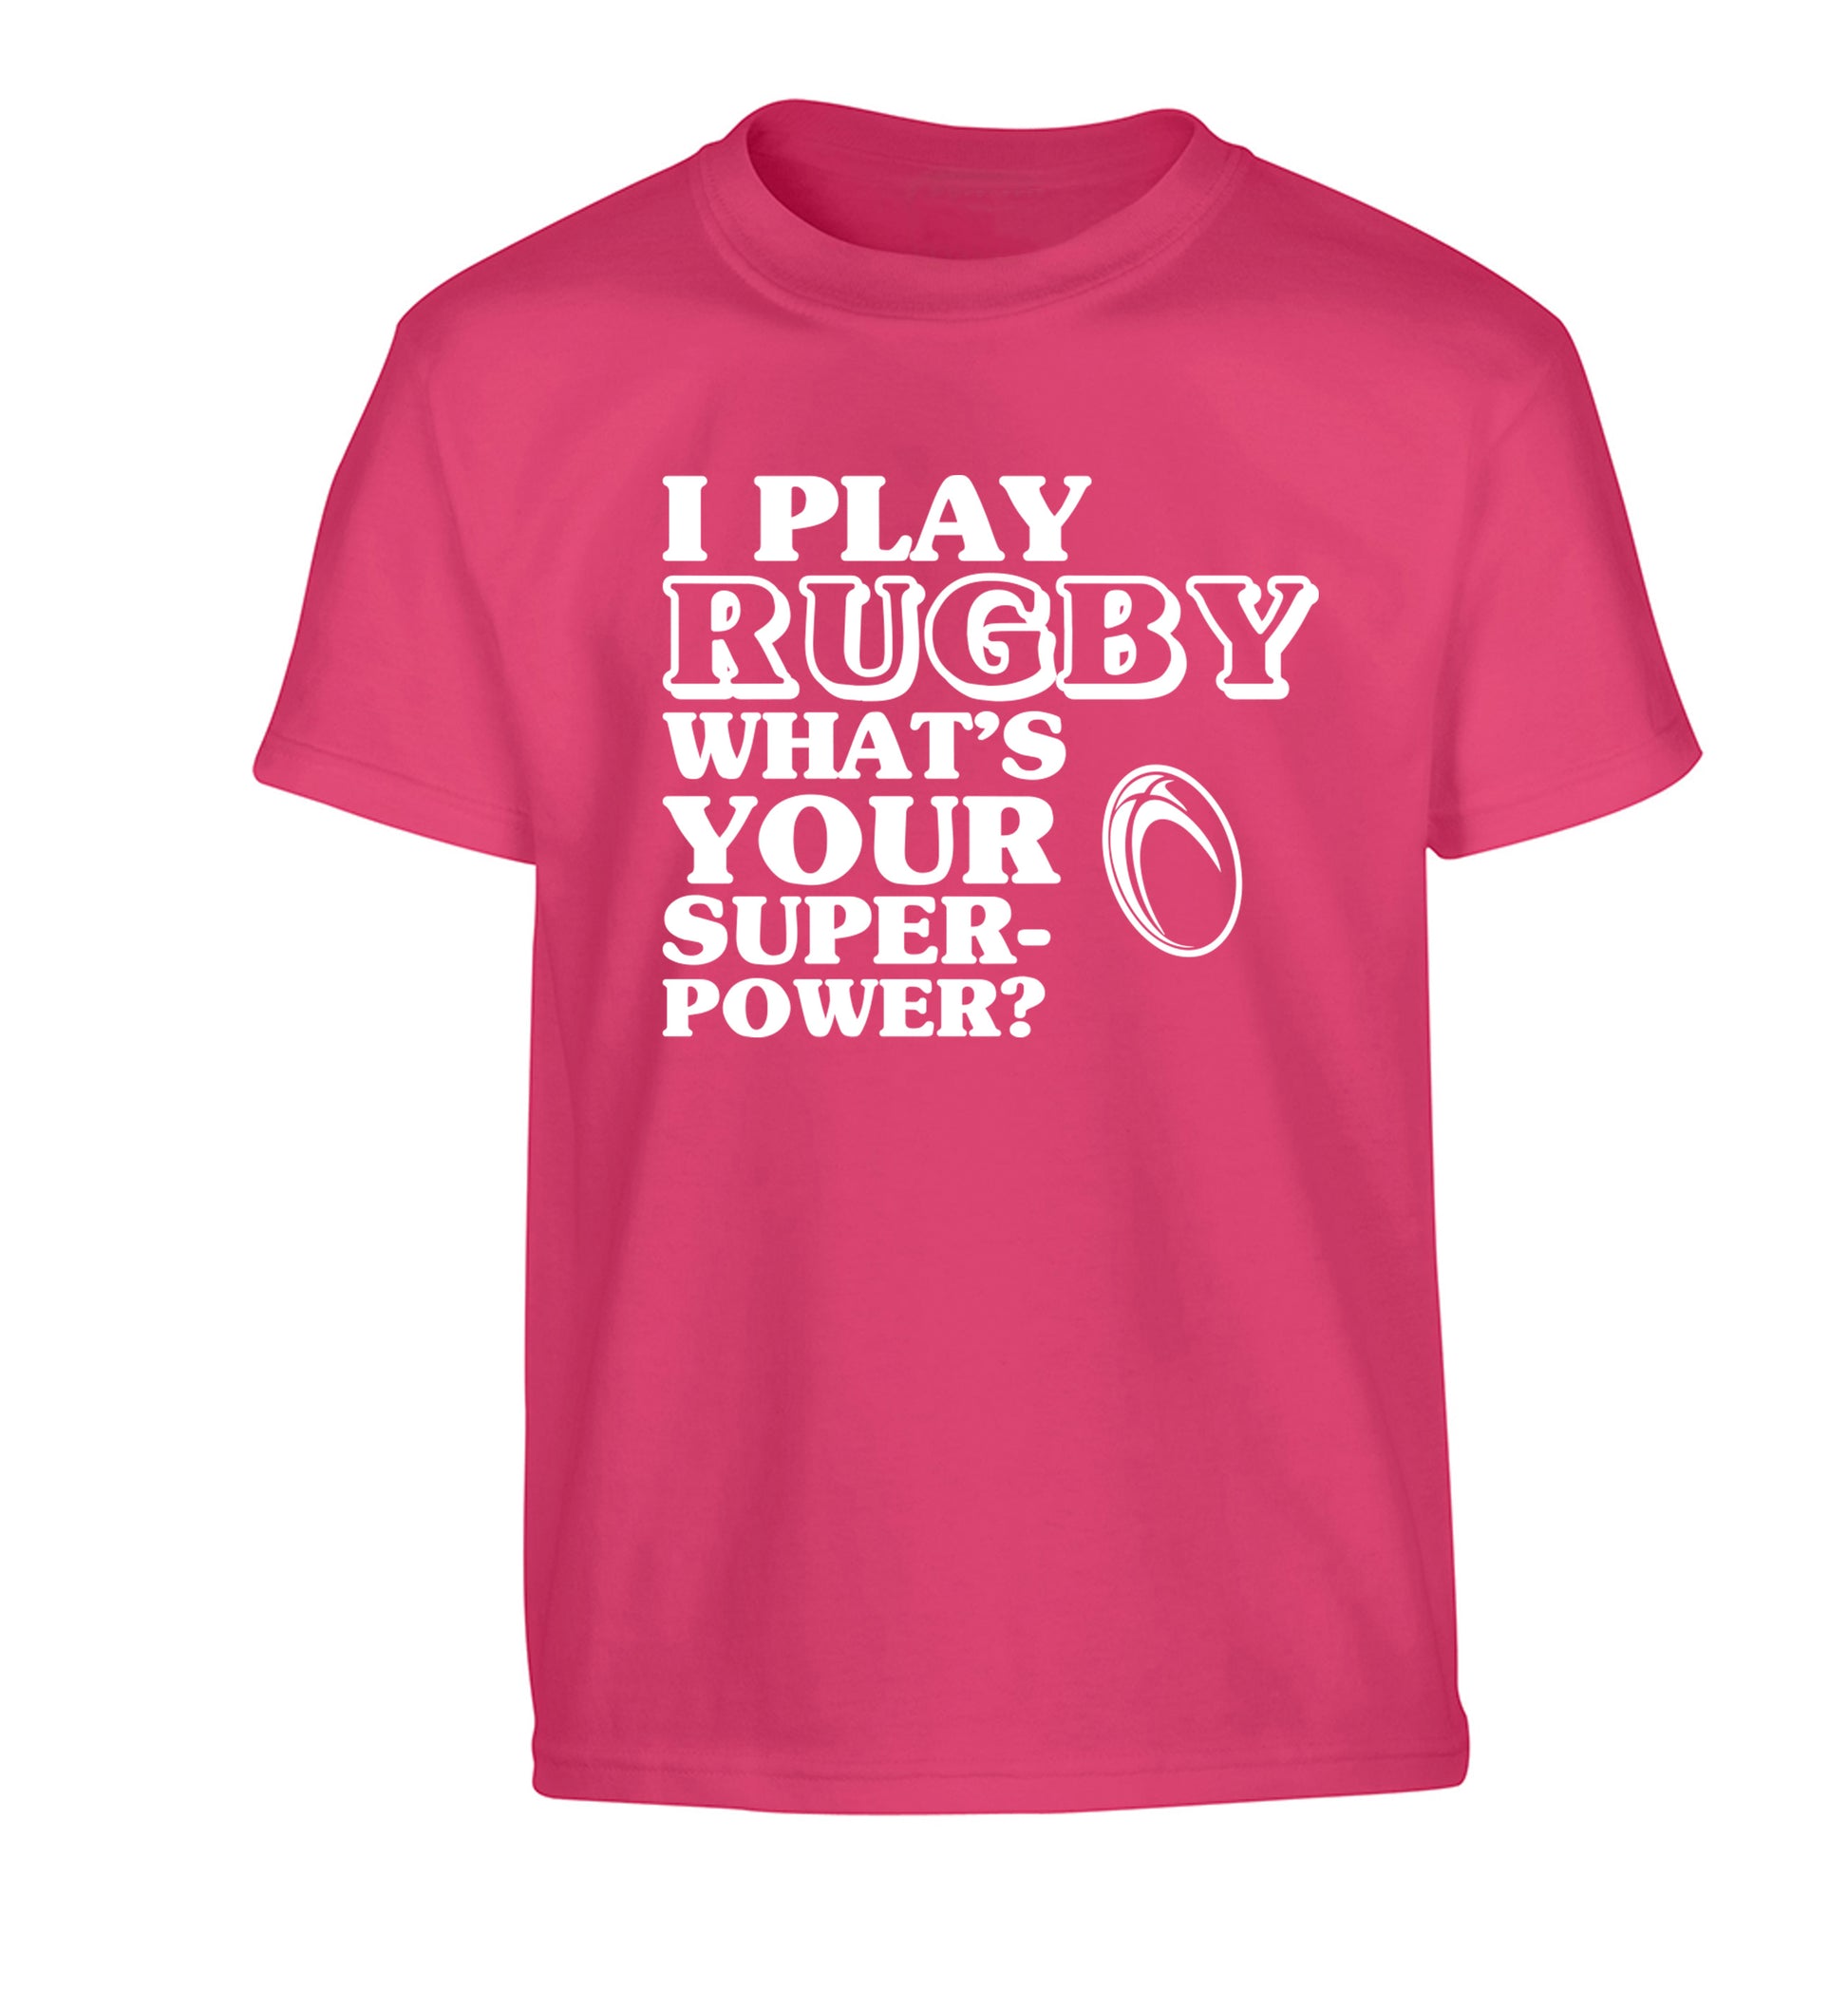 I play rugby what's your superpower? Children's pink Tshirt 12-13 Years